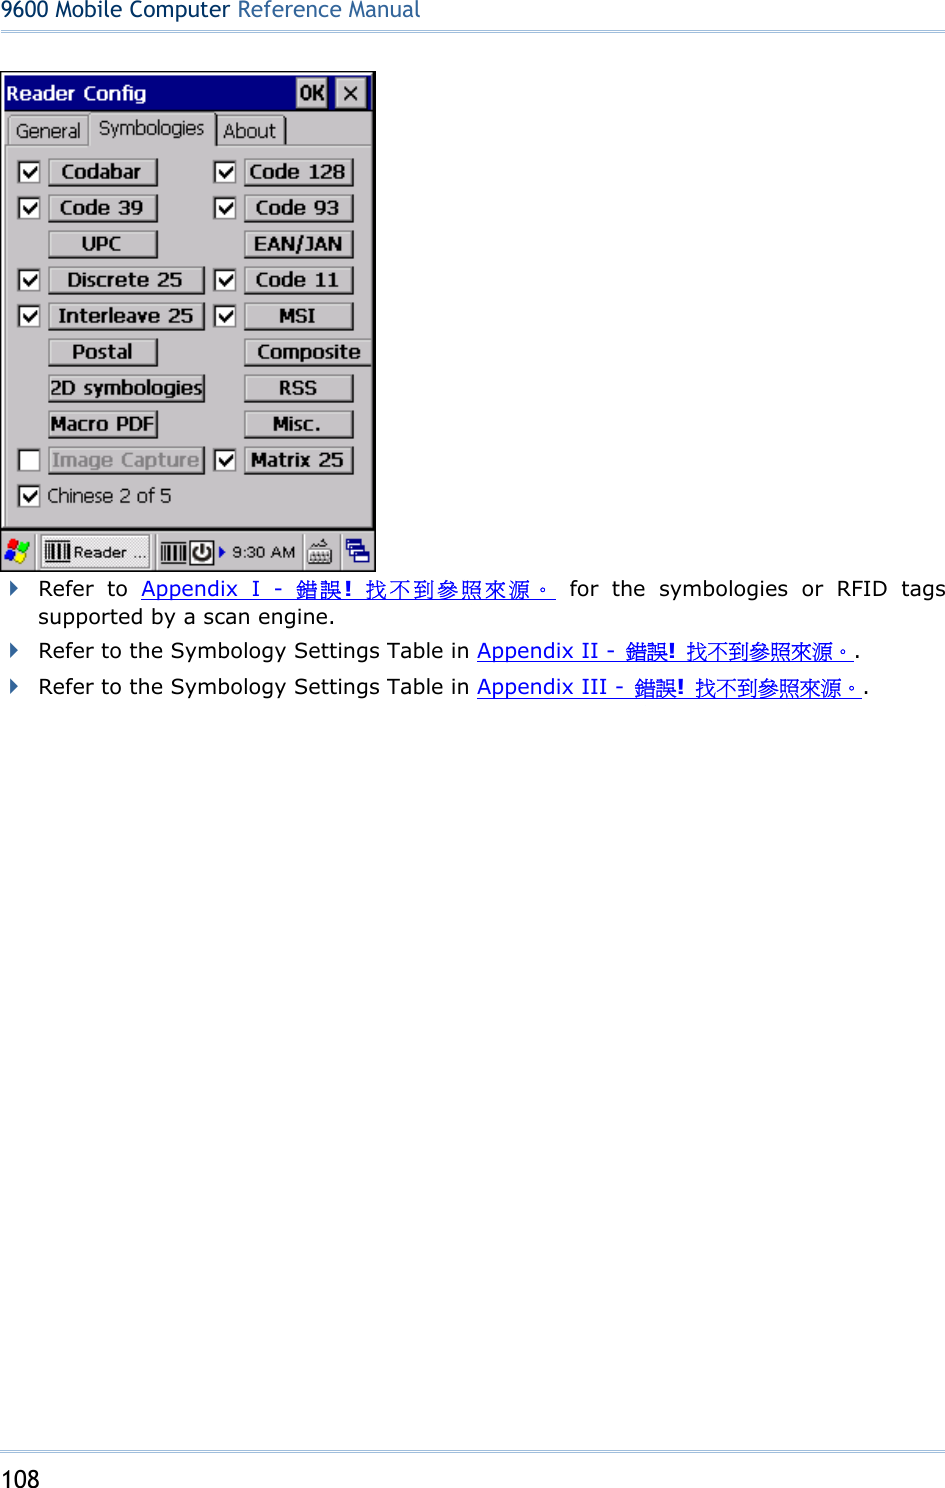 108  9600 Mobile ComputerReference Manual   Refer to Appendix I - 錯誤!  找不到參照來源。 for the symbologies or RFID tags supported by a scan engine.    Refer to the Symbology Settings Table in Appendix II -  錯誤!  找不到參照來源。.  Refer to the Symbology Settings Table in Appendix III -  錯誤!  找不到參照來源。.        